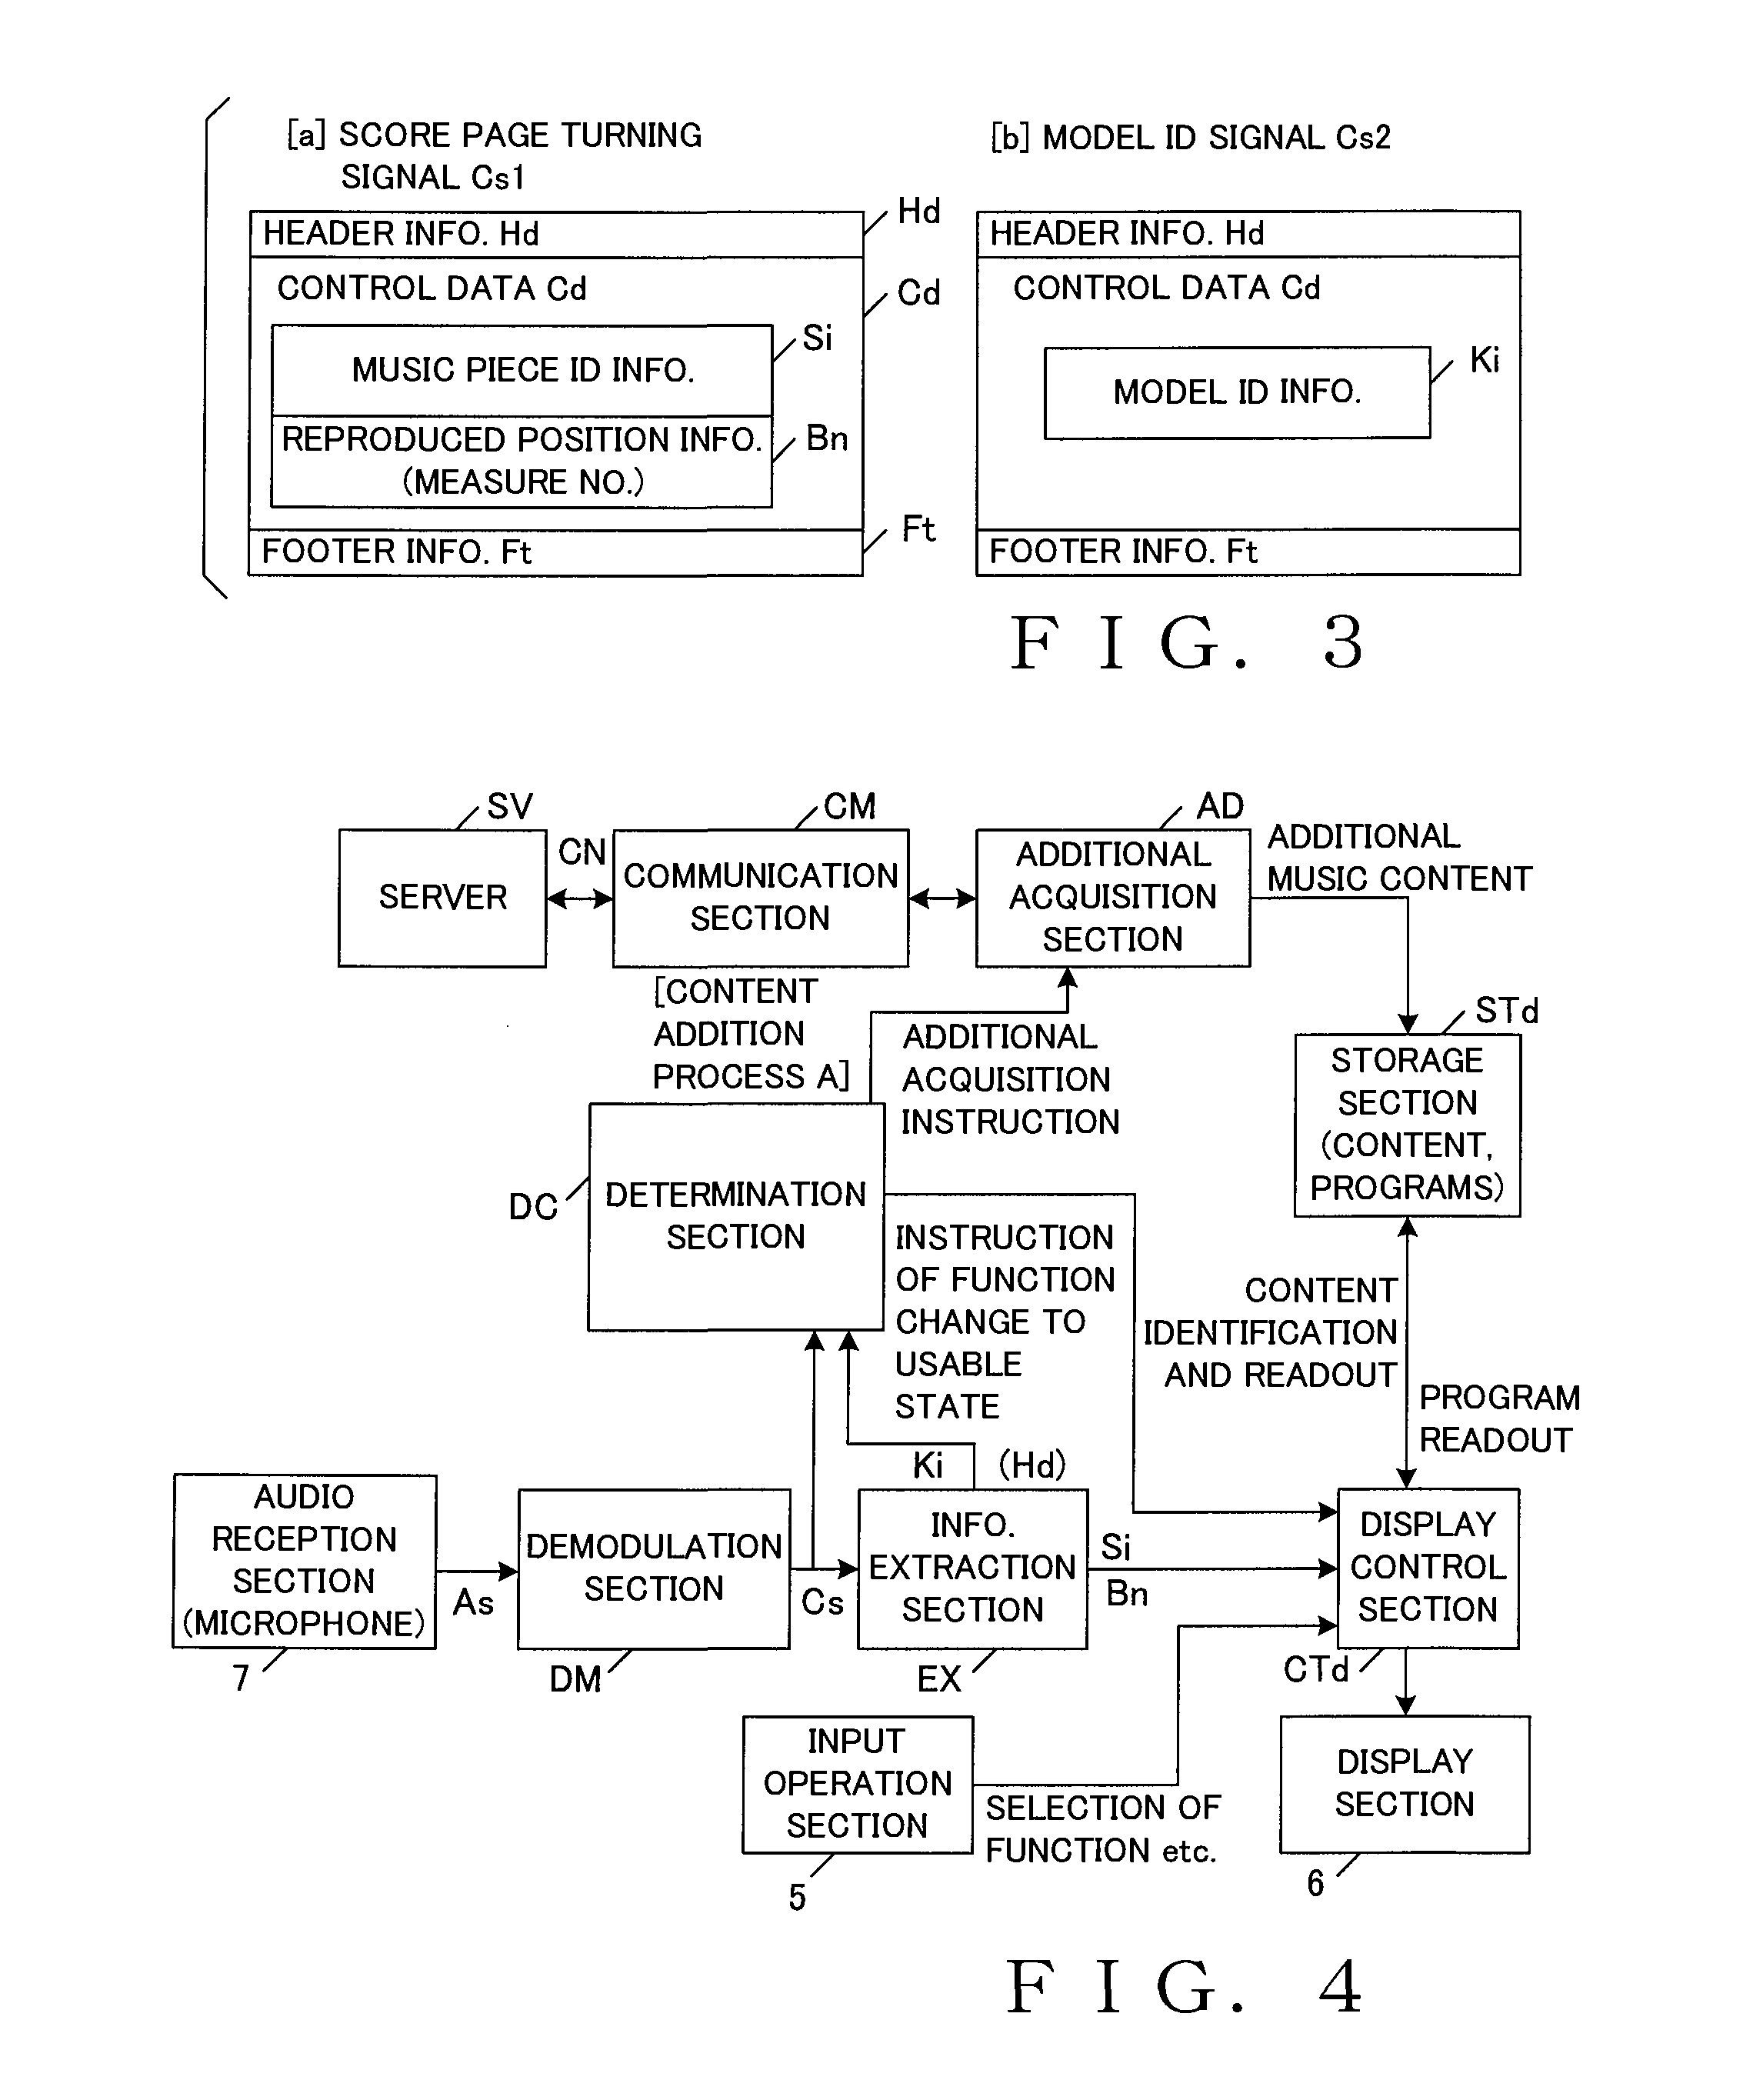 Updating music content or program to usable state in cooperation with external electronic audio apparatus